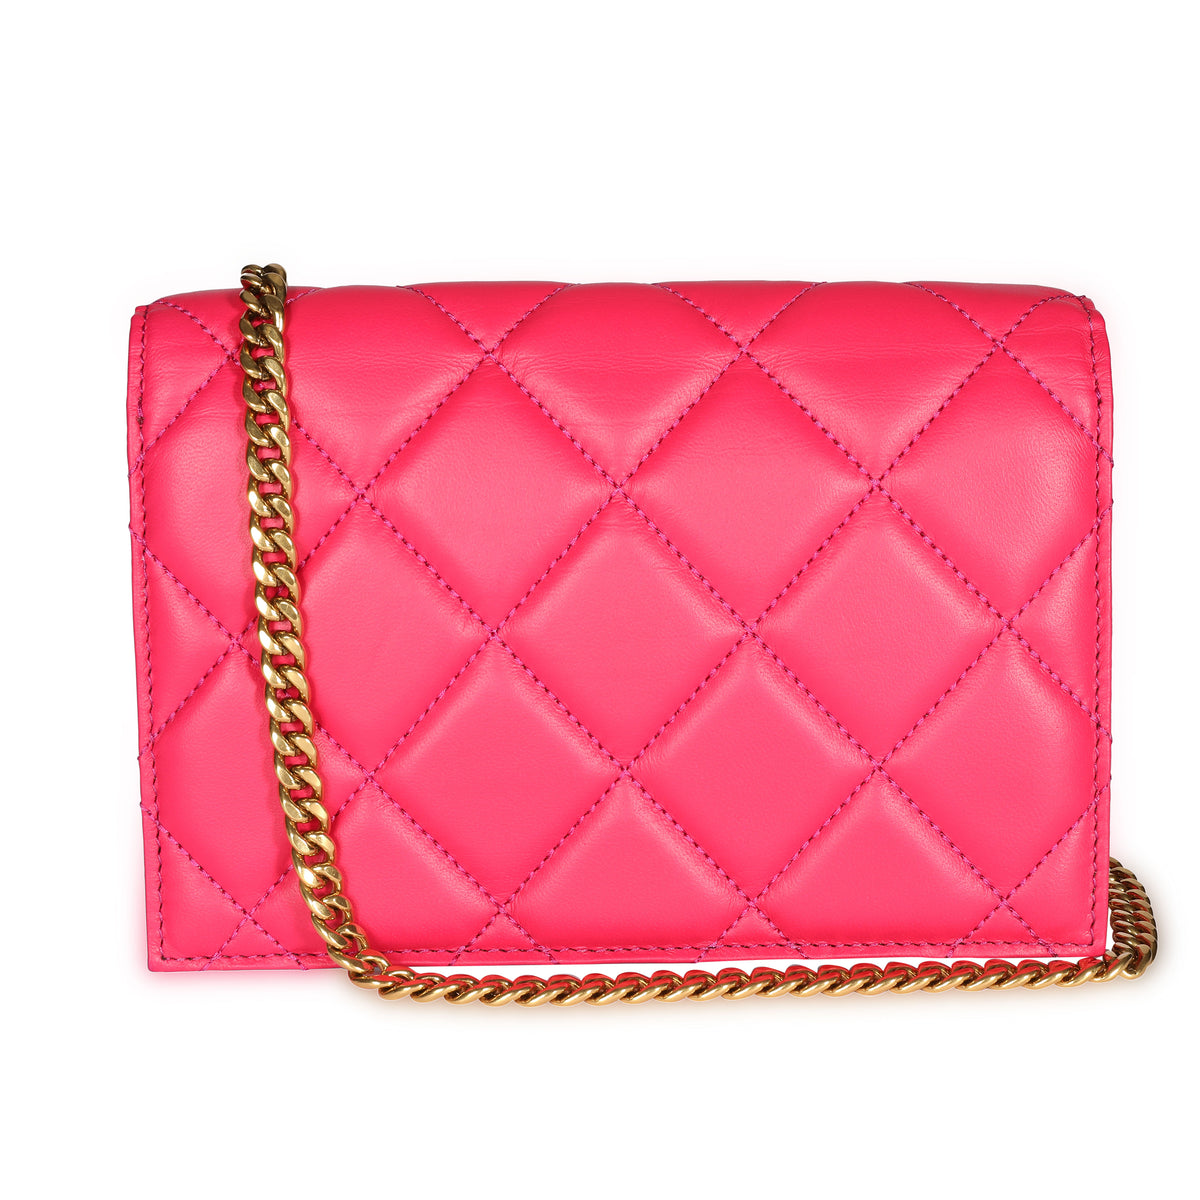 Alexander McQueen Hot Pink Quilted Leather Mini Skull Crossbody Bag